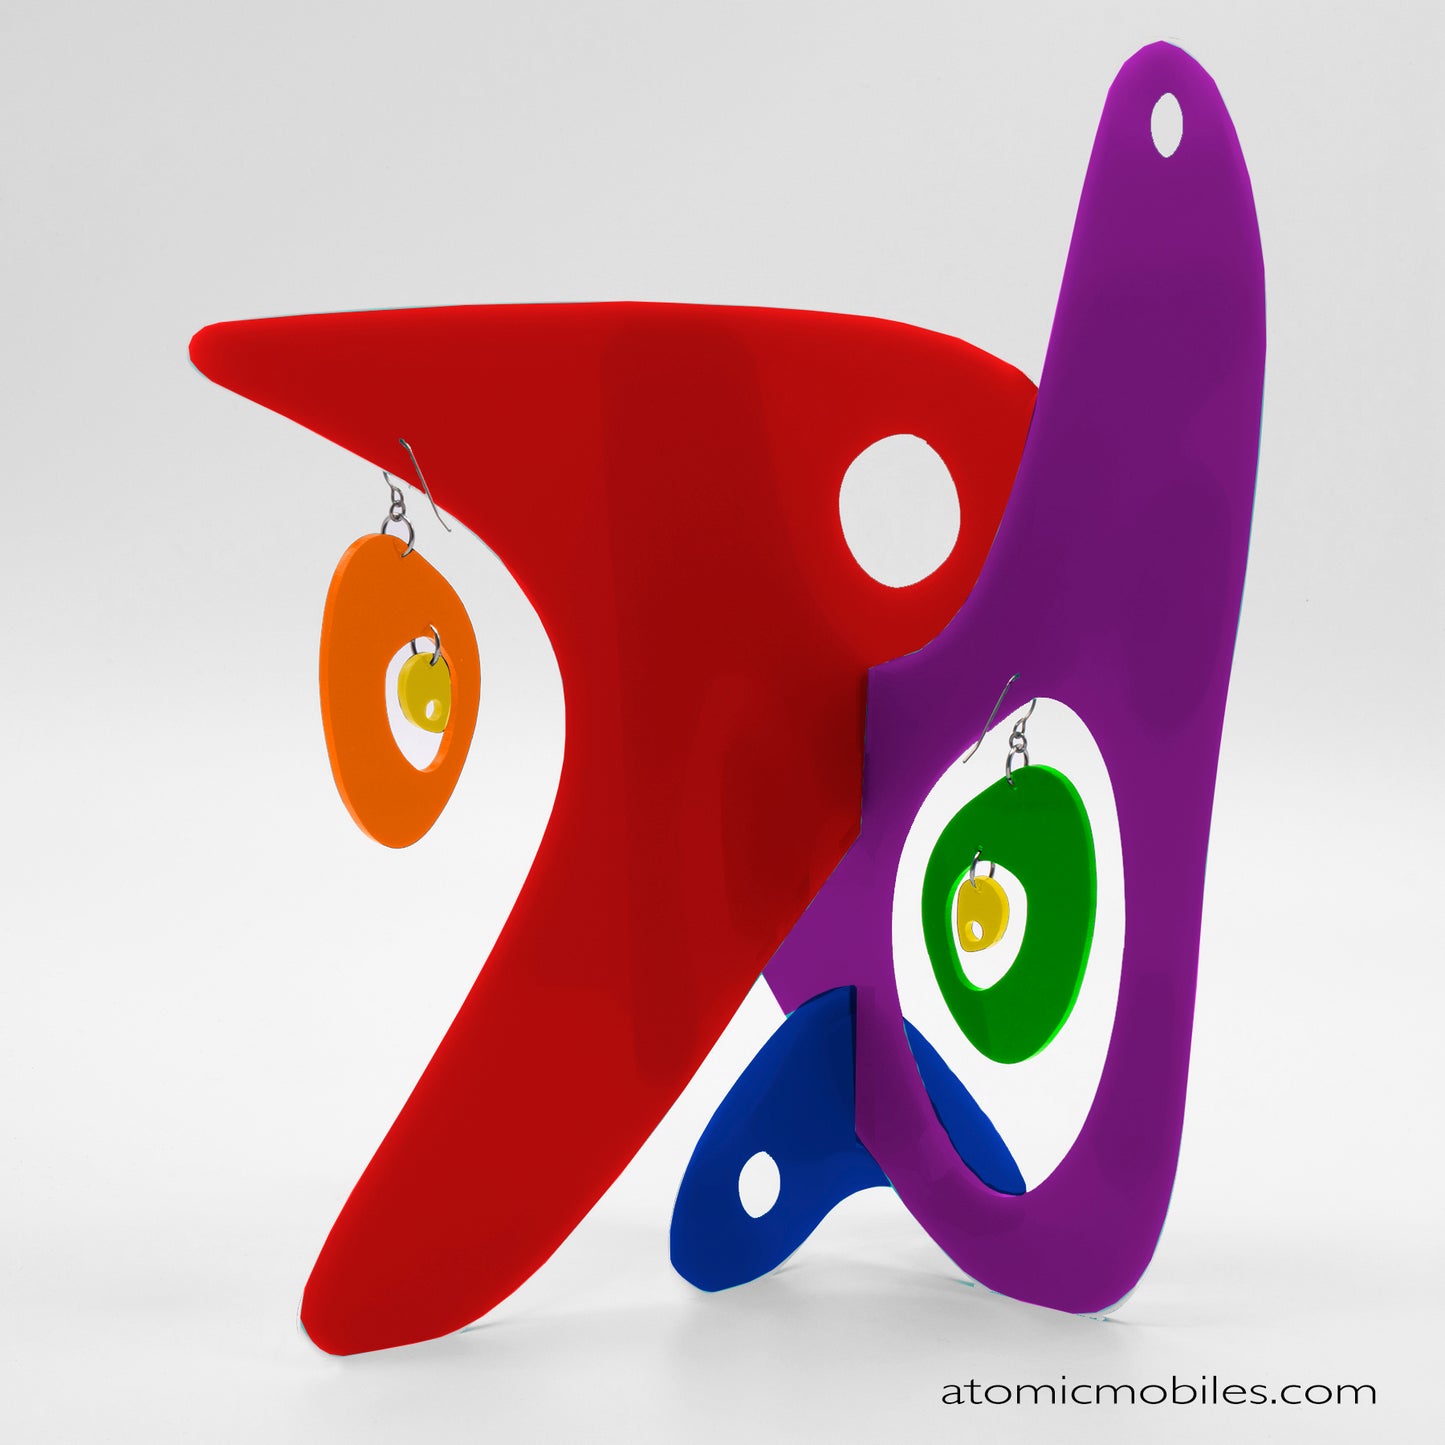 LGBTQ Rainbow Pride Modernist Tabletop Sculpture + Earrings in Red by AtomicMobiles.com